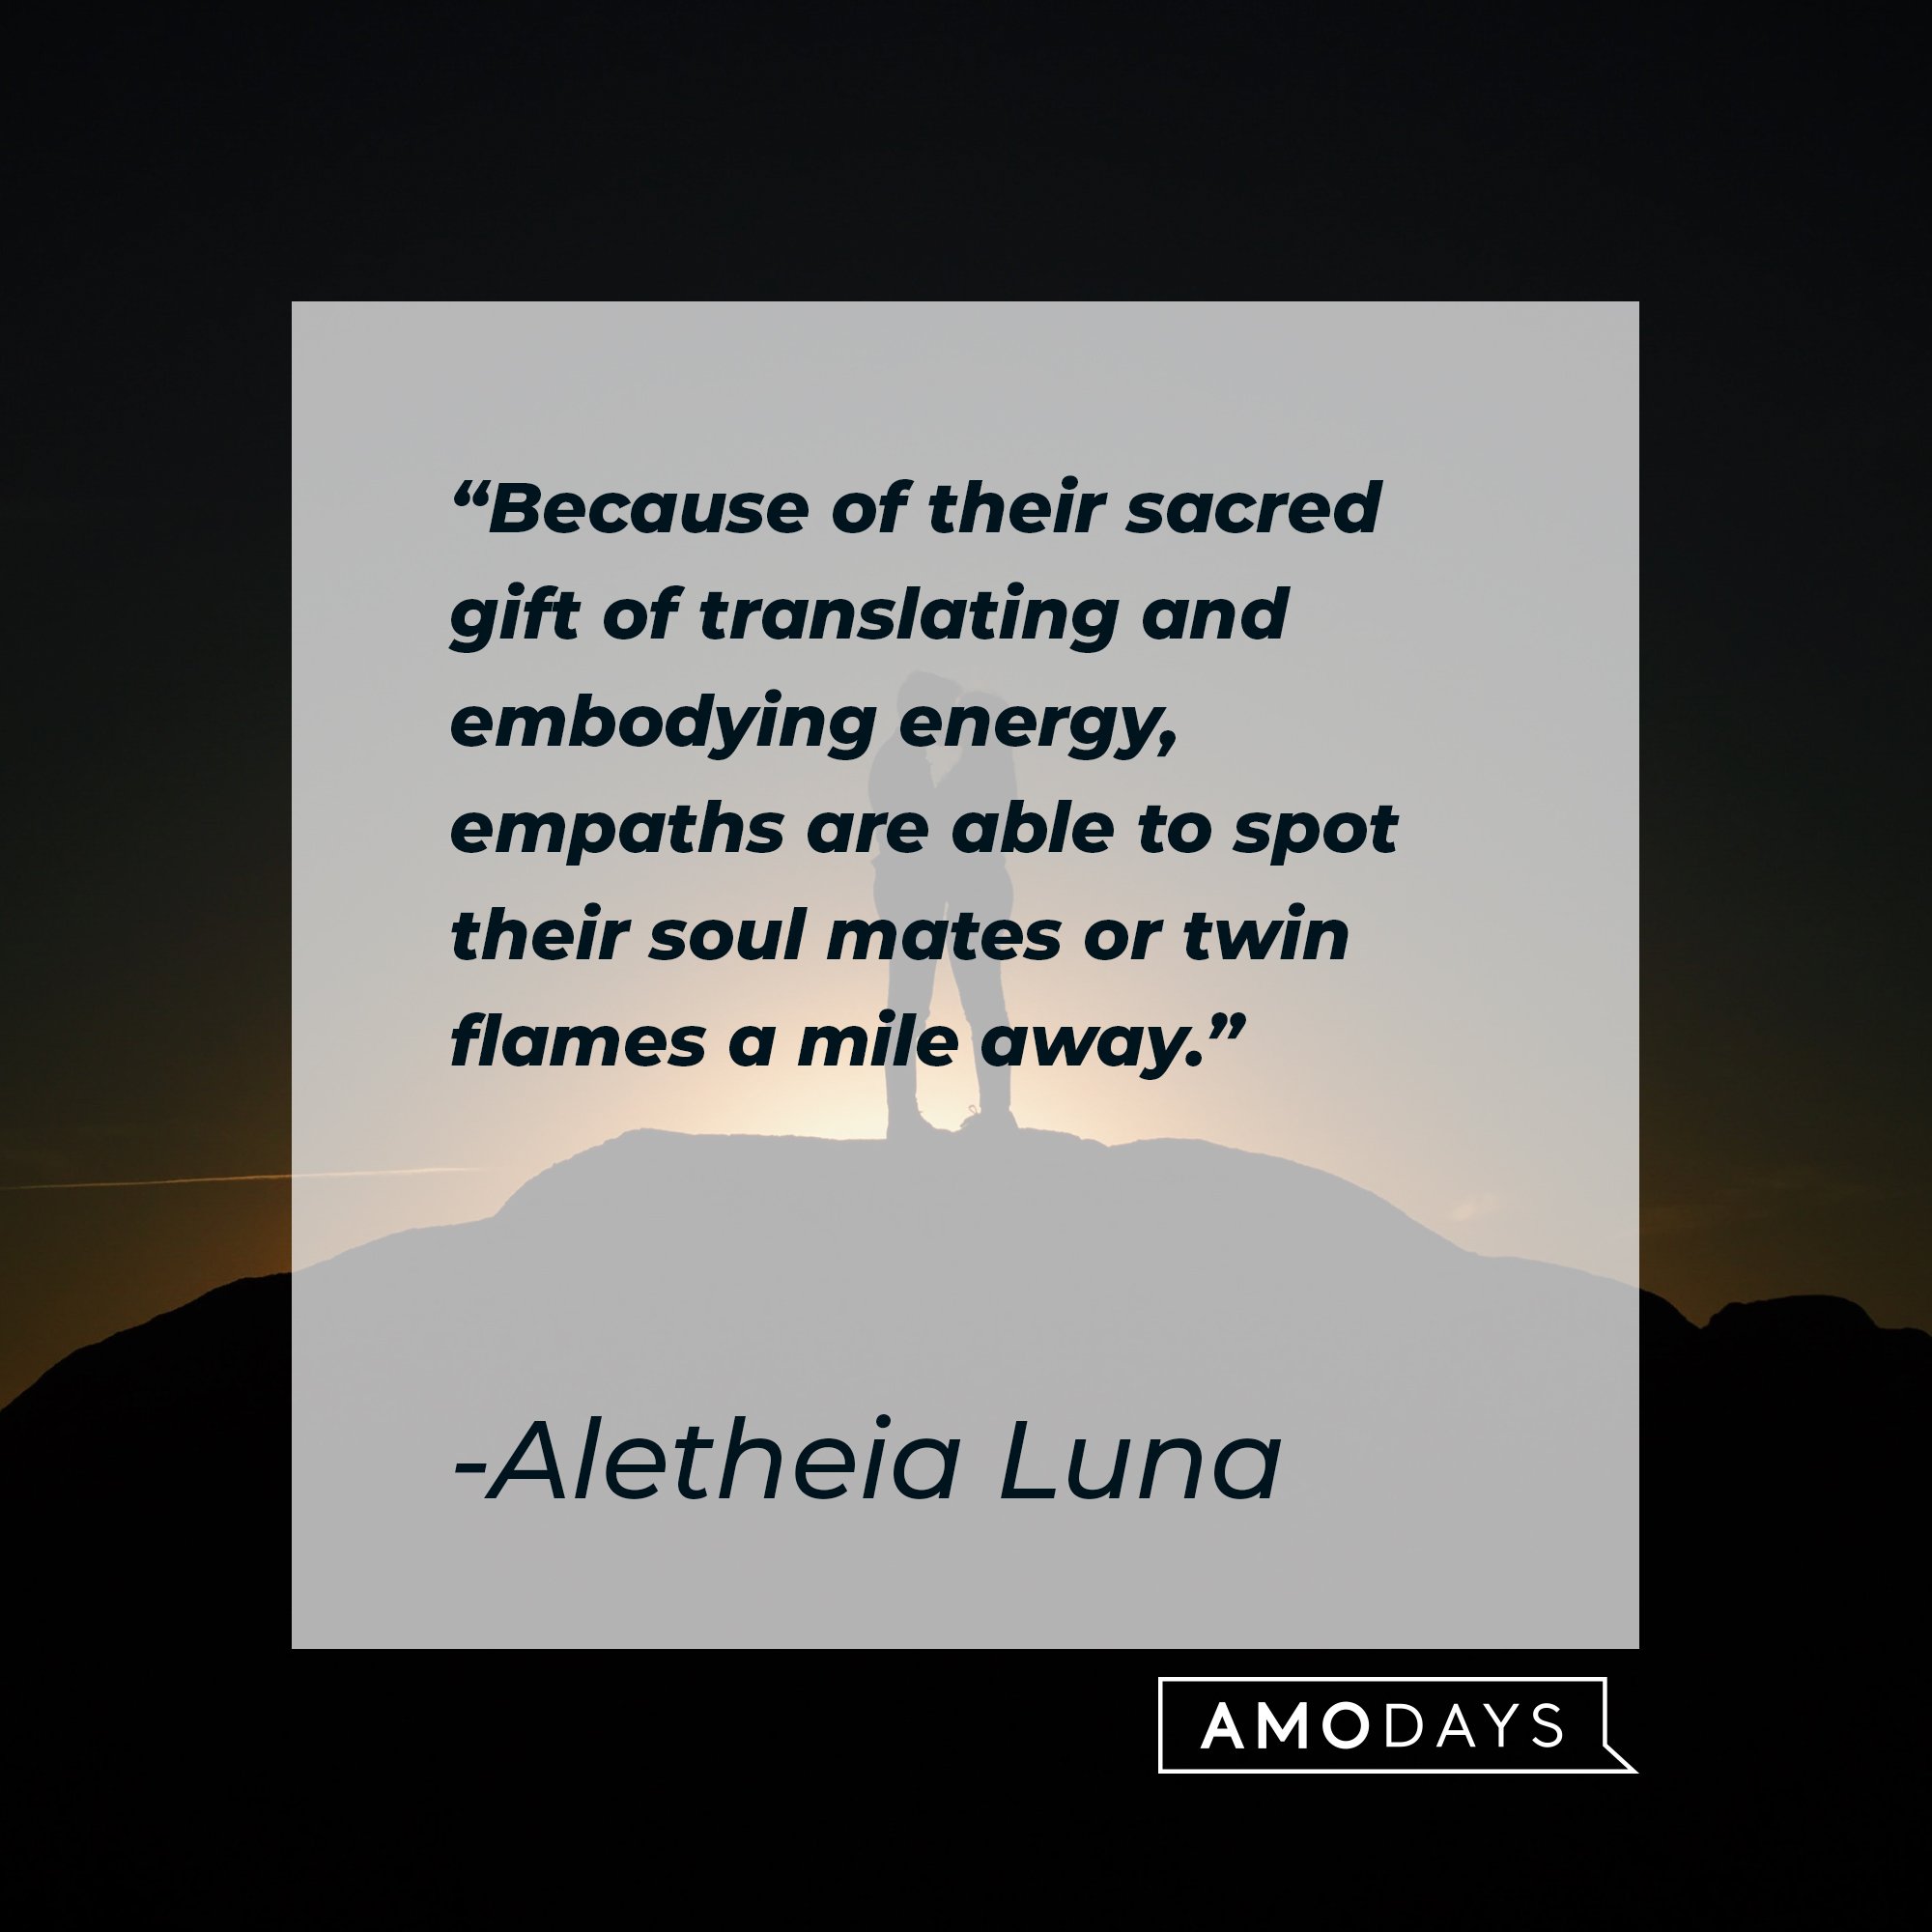 Aletheia Luna’s quote: "Because of their sacred gift of translating and embodying energy, empaths are able to spot their soul mates or twin flames a mile away." | Image: AmoDays  